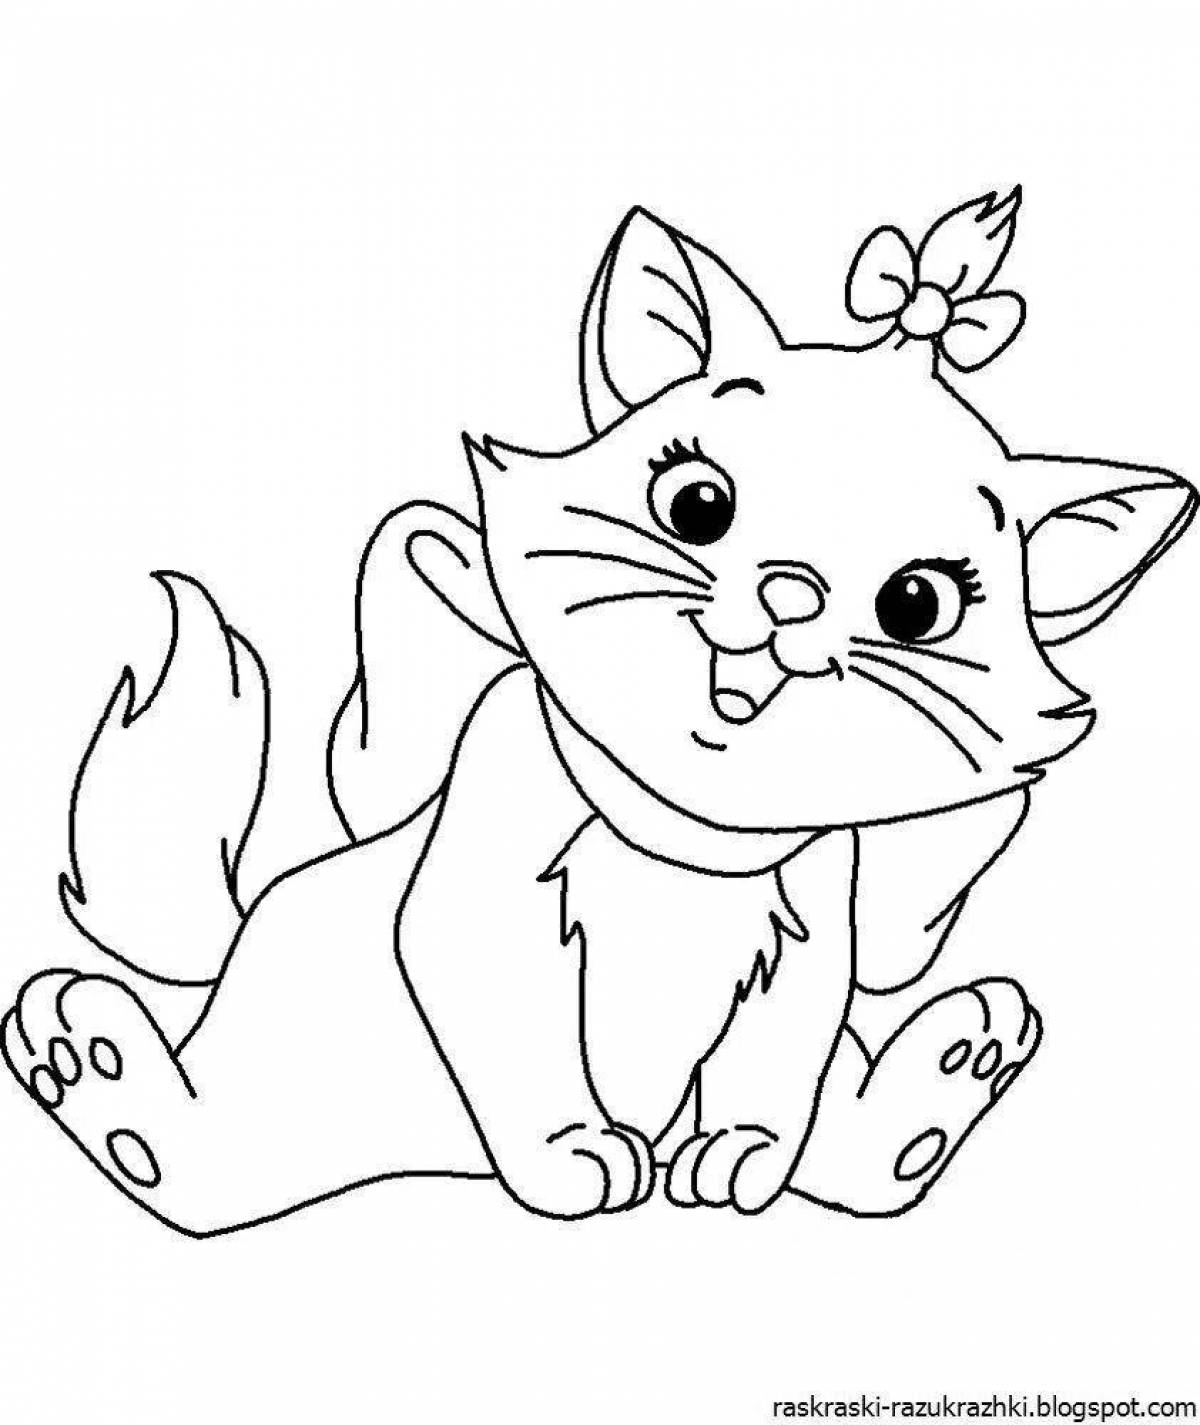 Cat coloring for children 5-6 years old